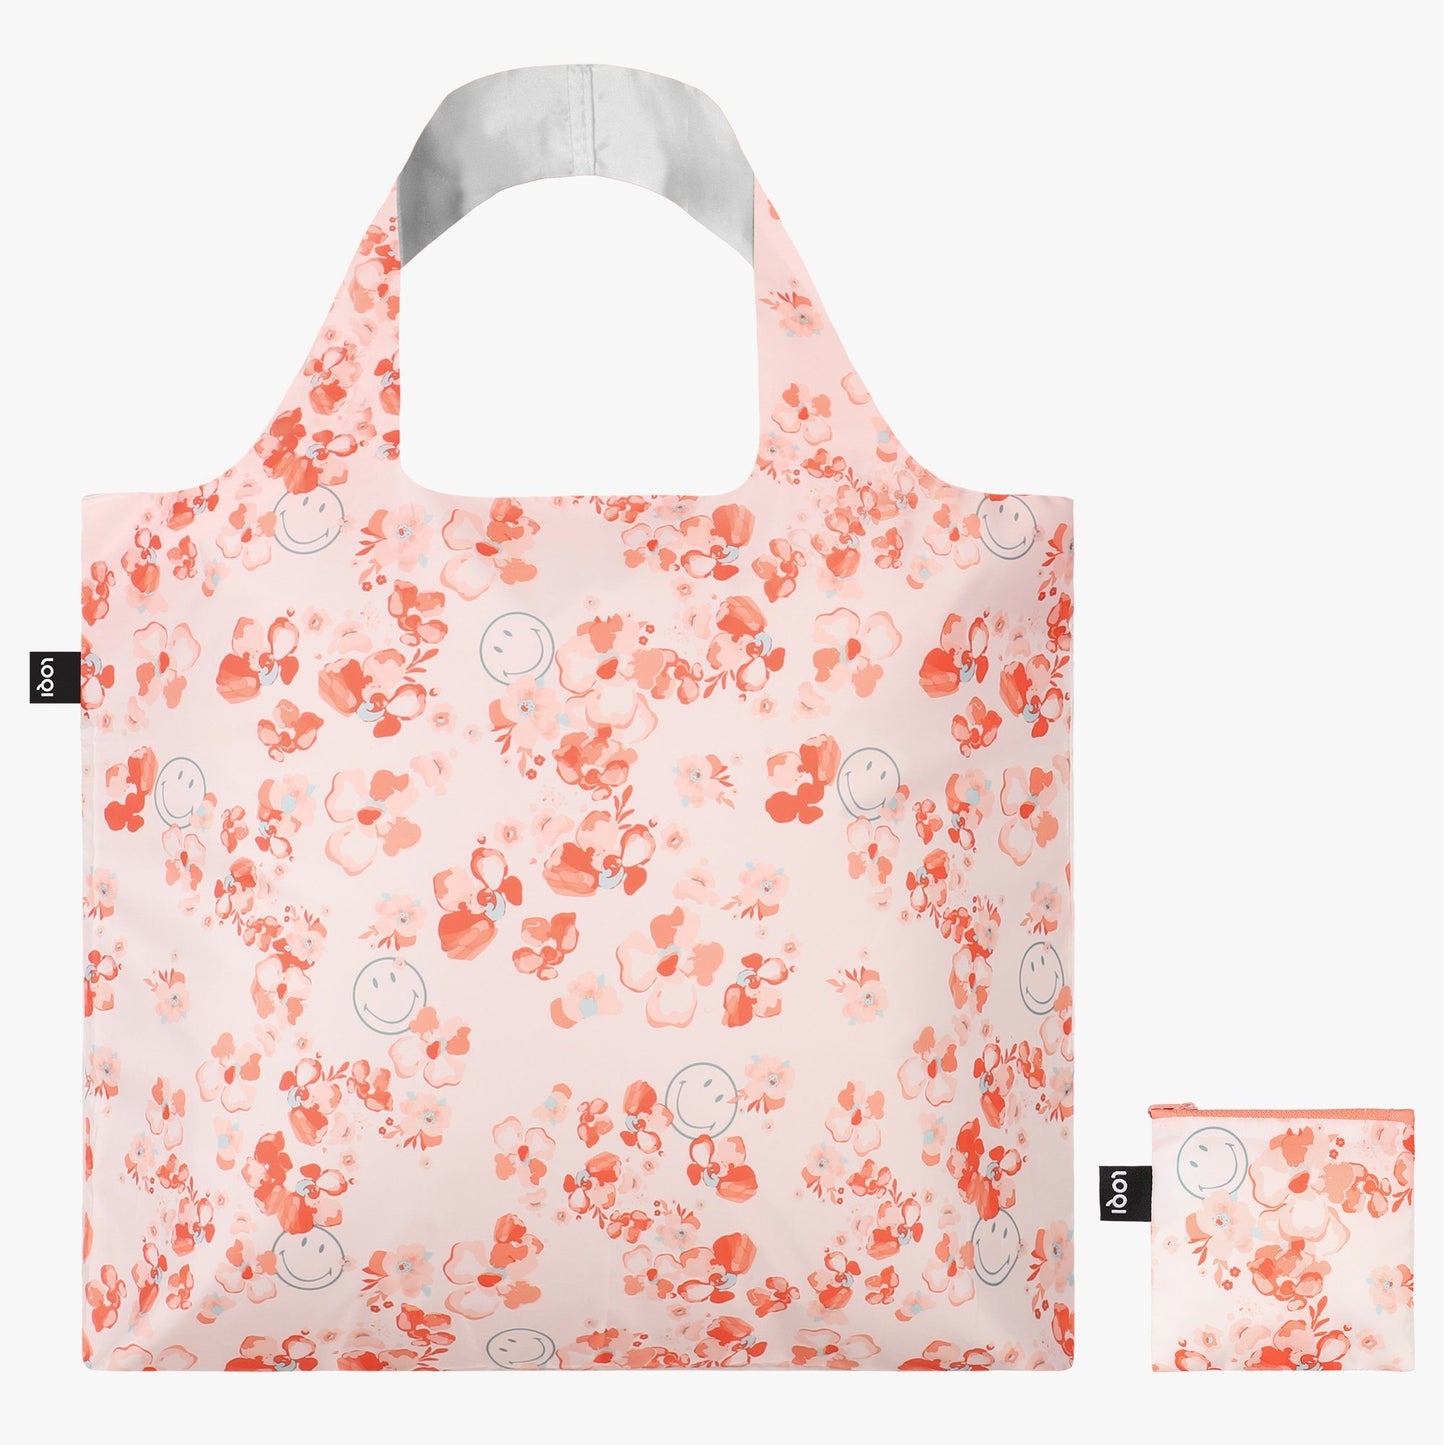 LOQI Smiley Blossom Recycled Bag